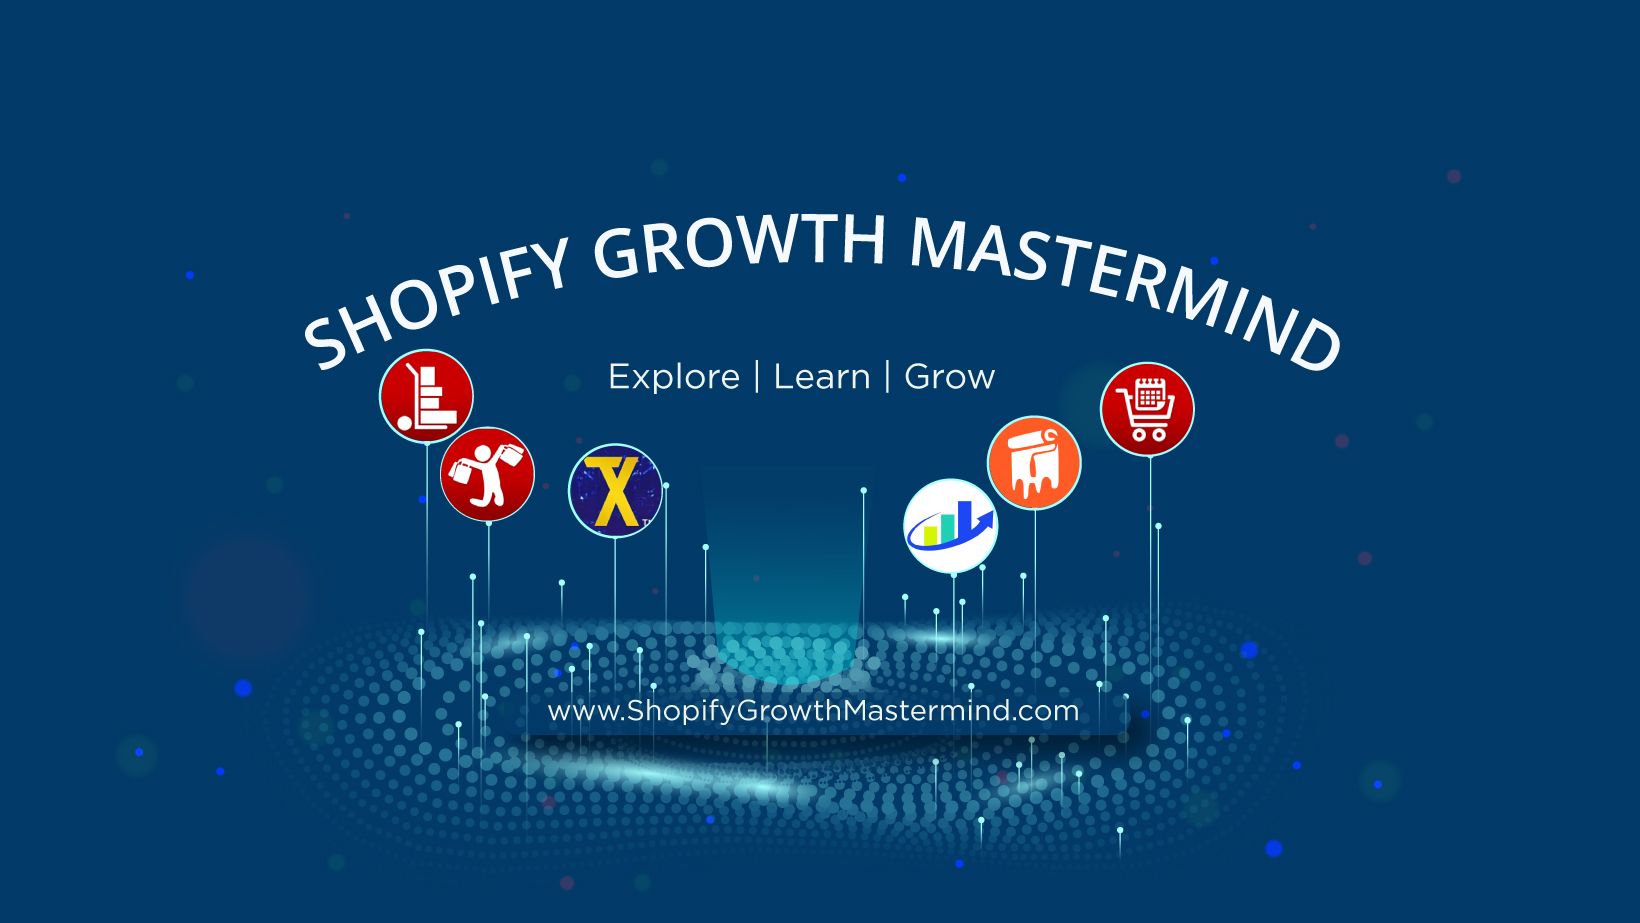 Shopify Growth Mastermind- eCommerce Facebook Groups 2021